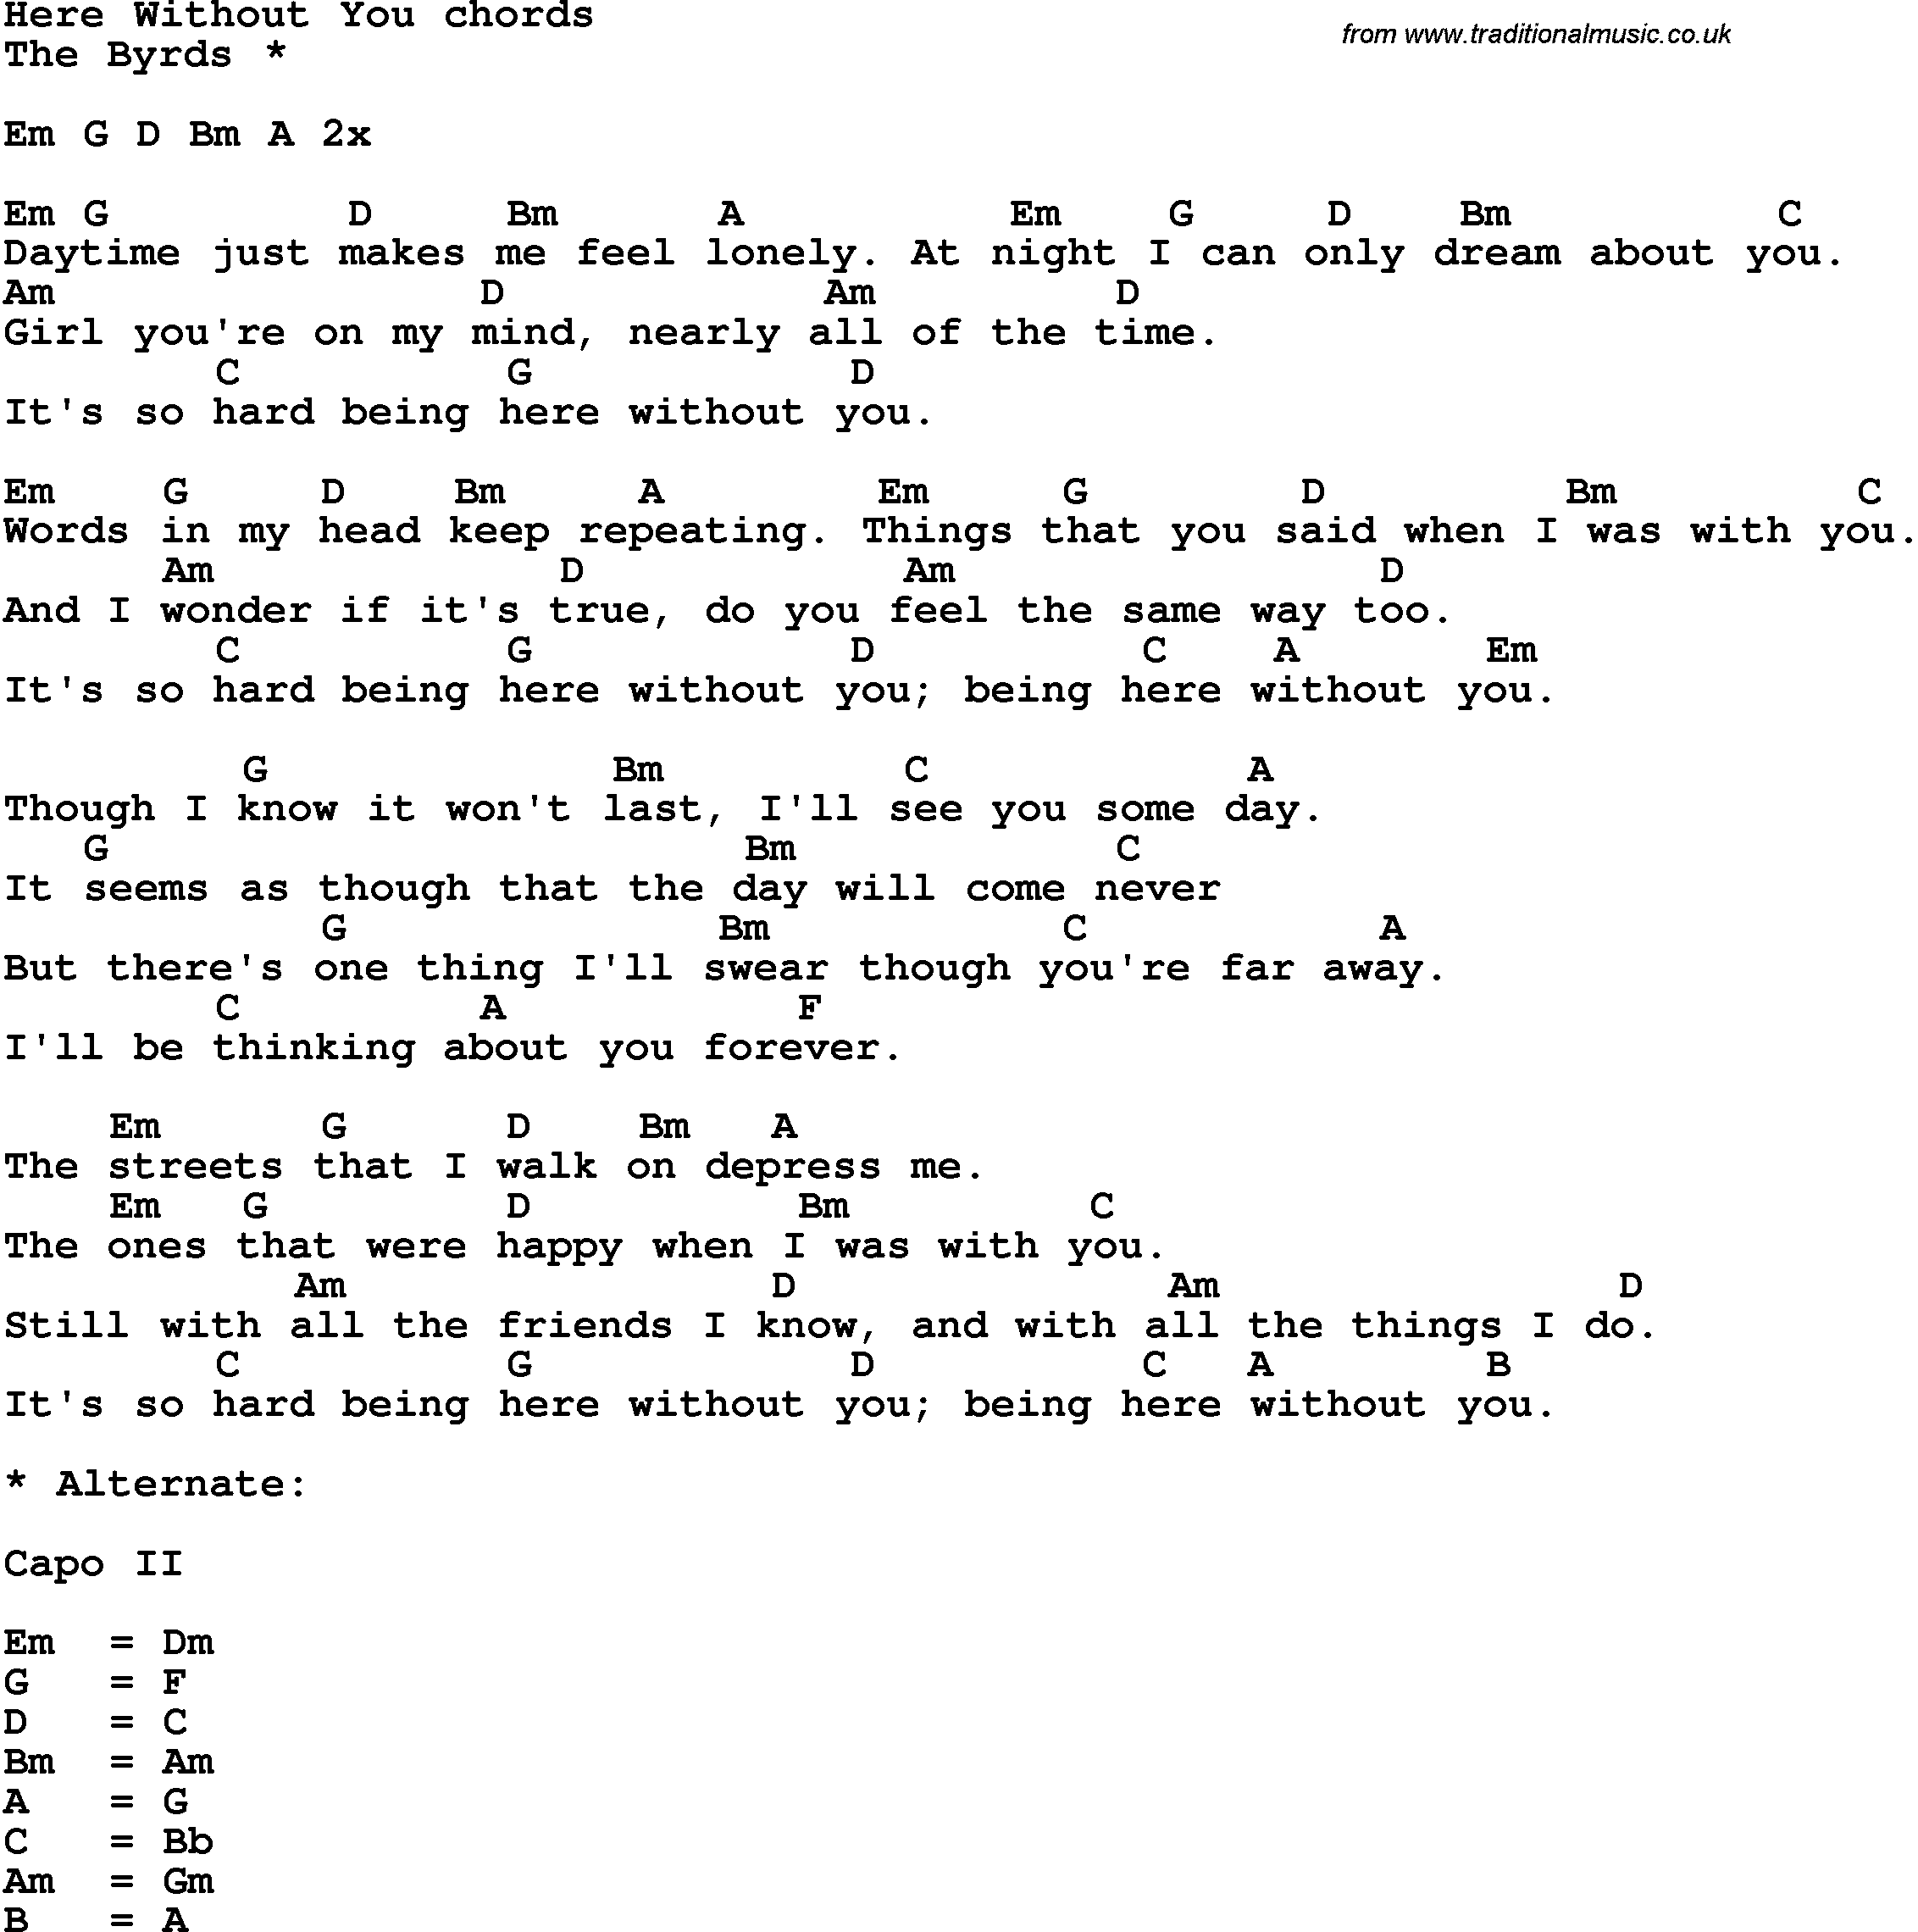 Song Lyrics with guitar chords for Here Without You